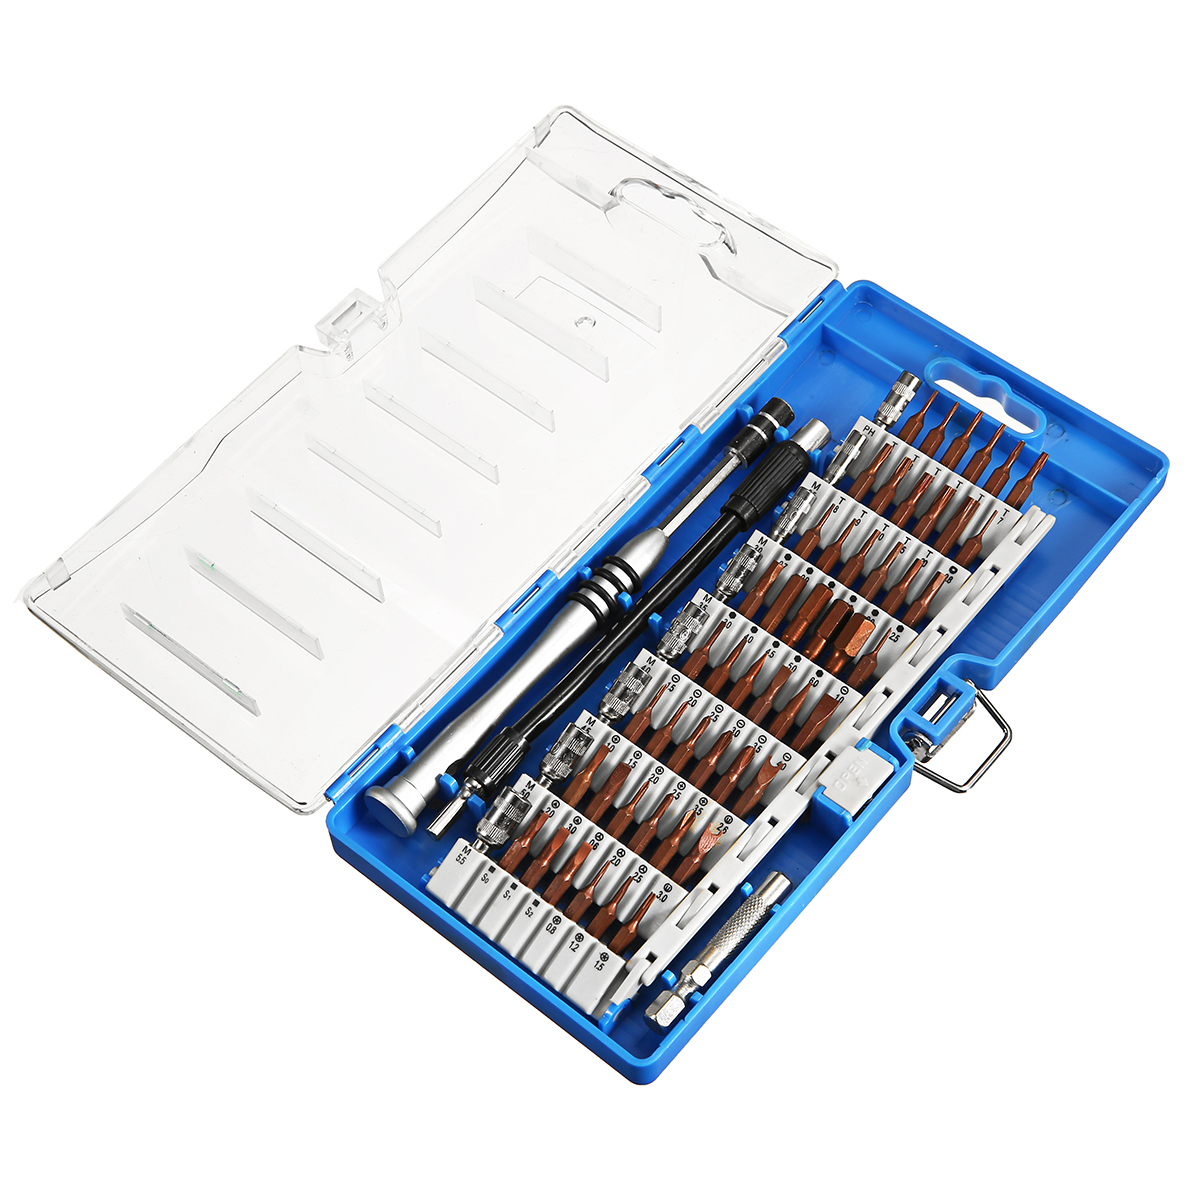 60-in-1-Precision-Screwdrivers-Set-S2-Alloy-Steel-Magnetic-Bits-Professional-Electronics-Repair-Tool-1506765-4